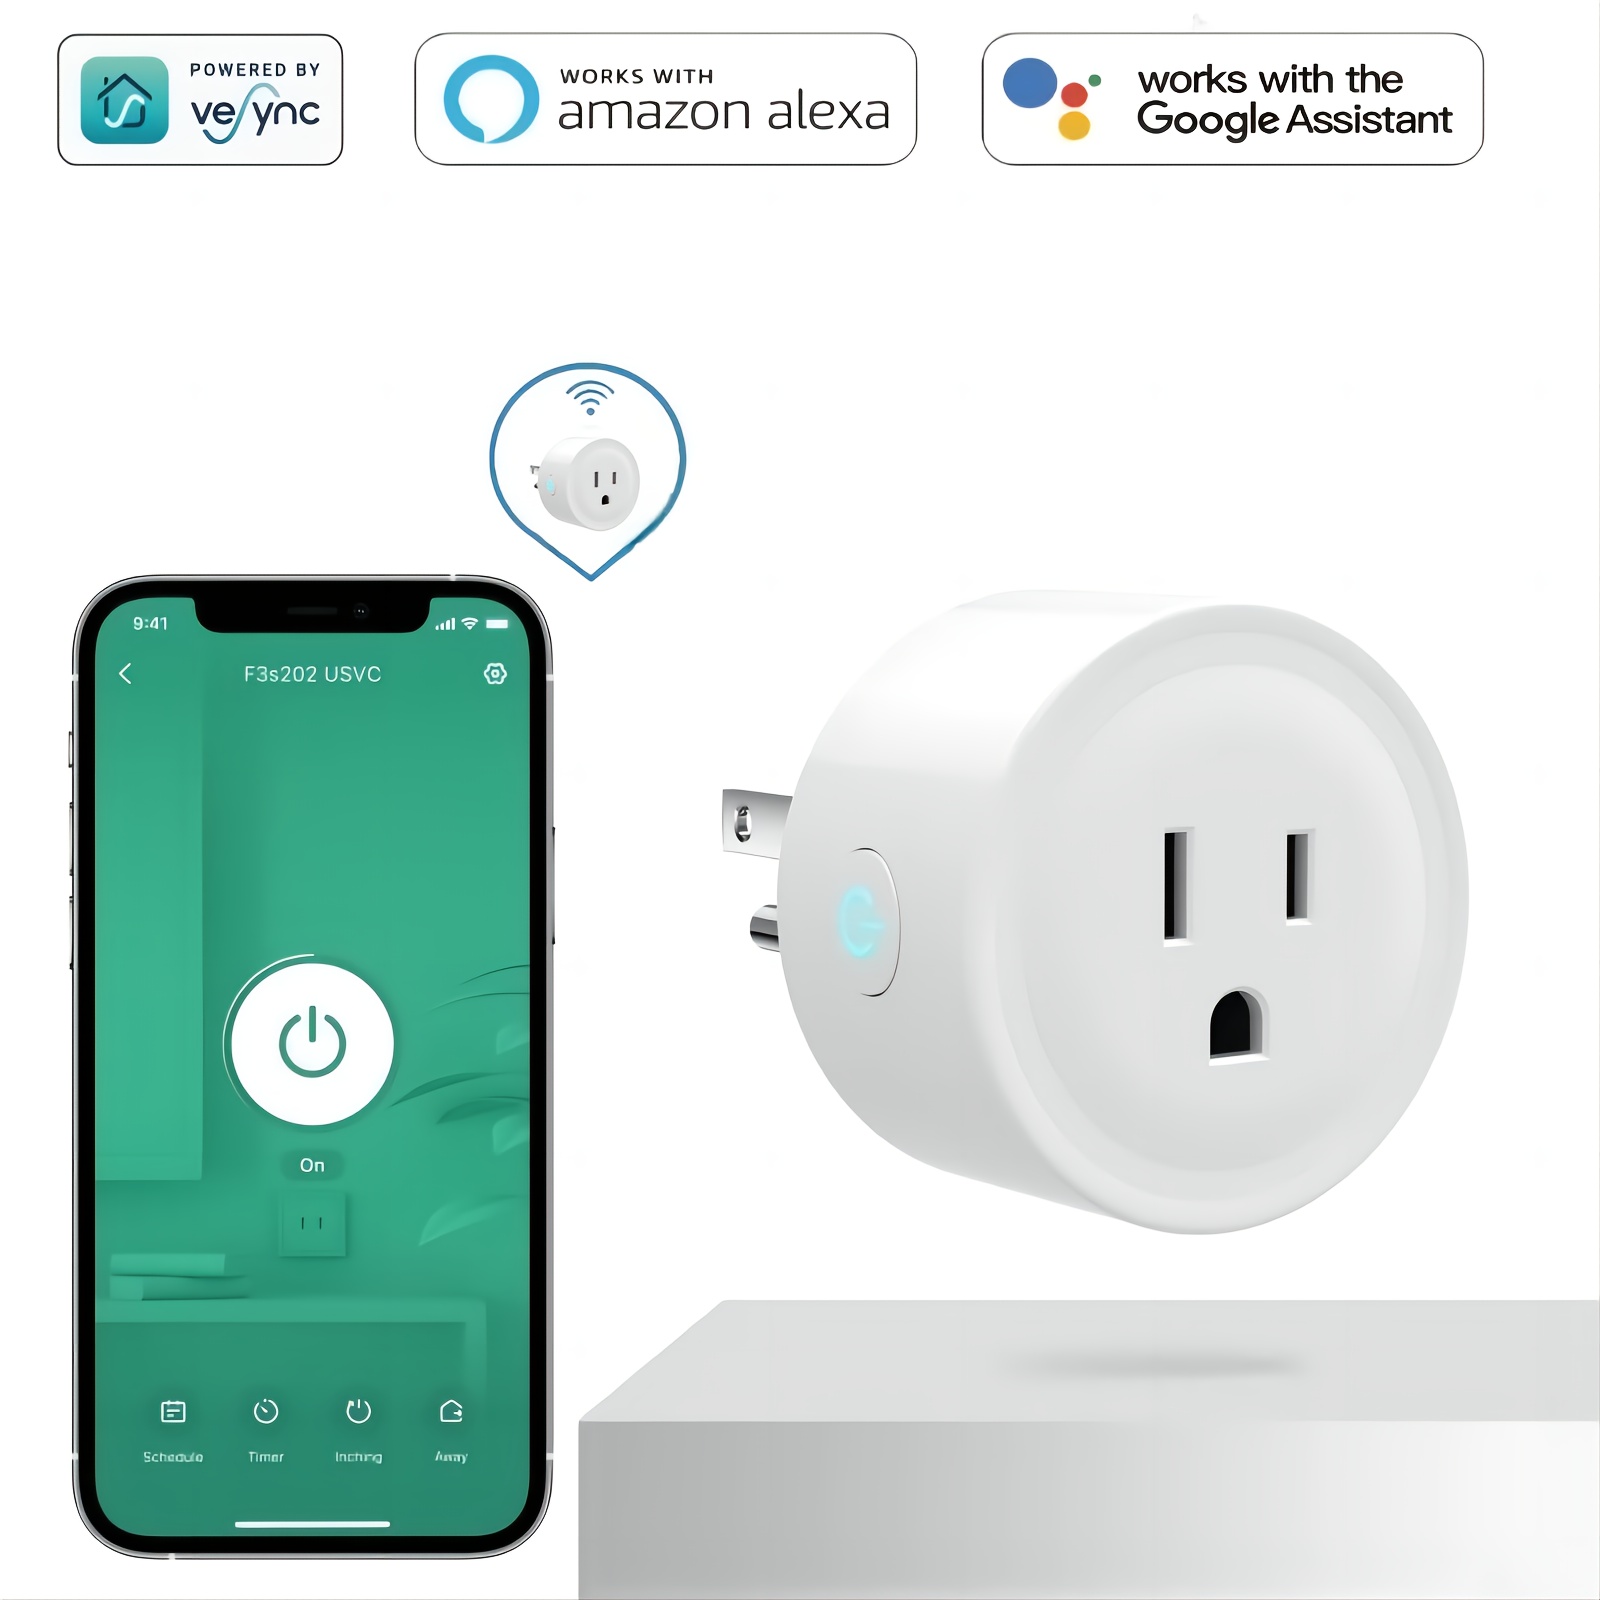 Smart Plugs That Work with Alexa Google Home Siri, Wireless 2.4G WiFi  Outlet Controlled by Smart Life Tuya Avatar Controls APP, 10A Mini Socket